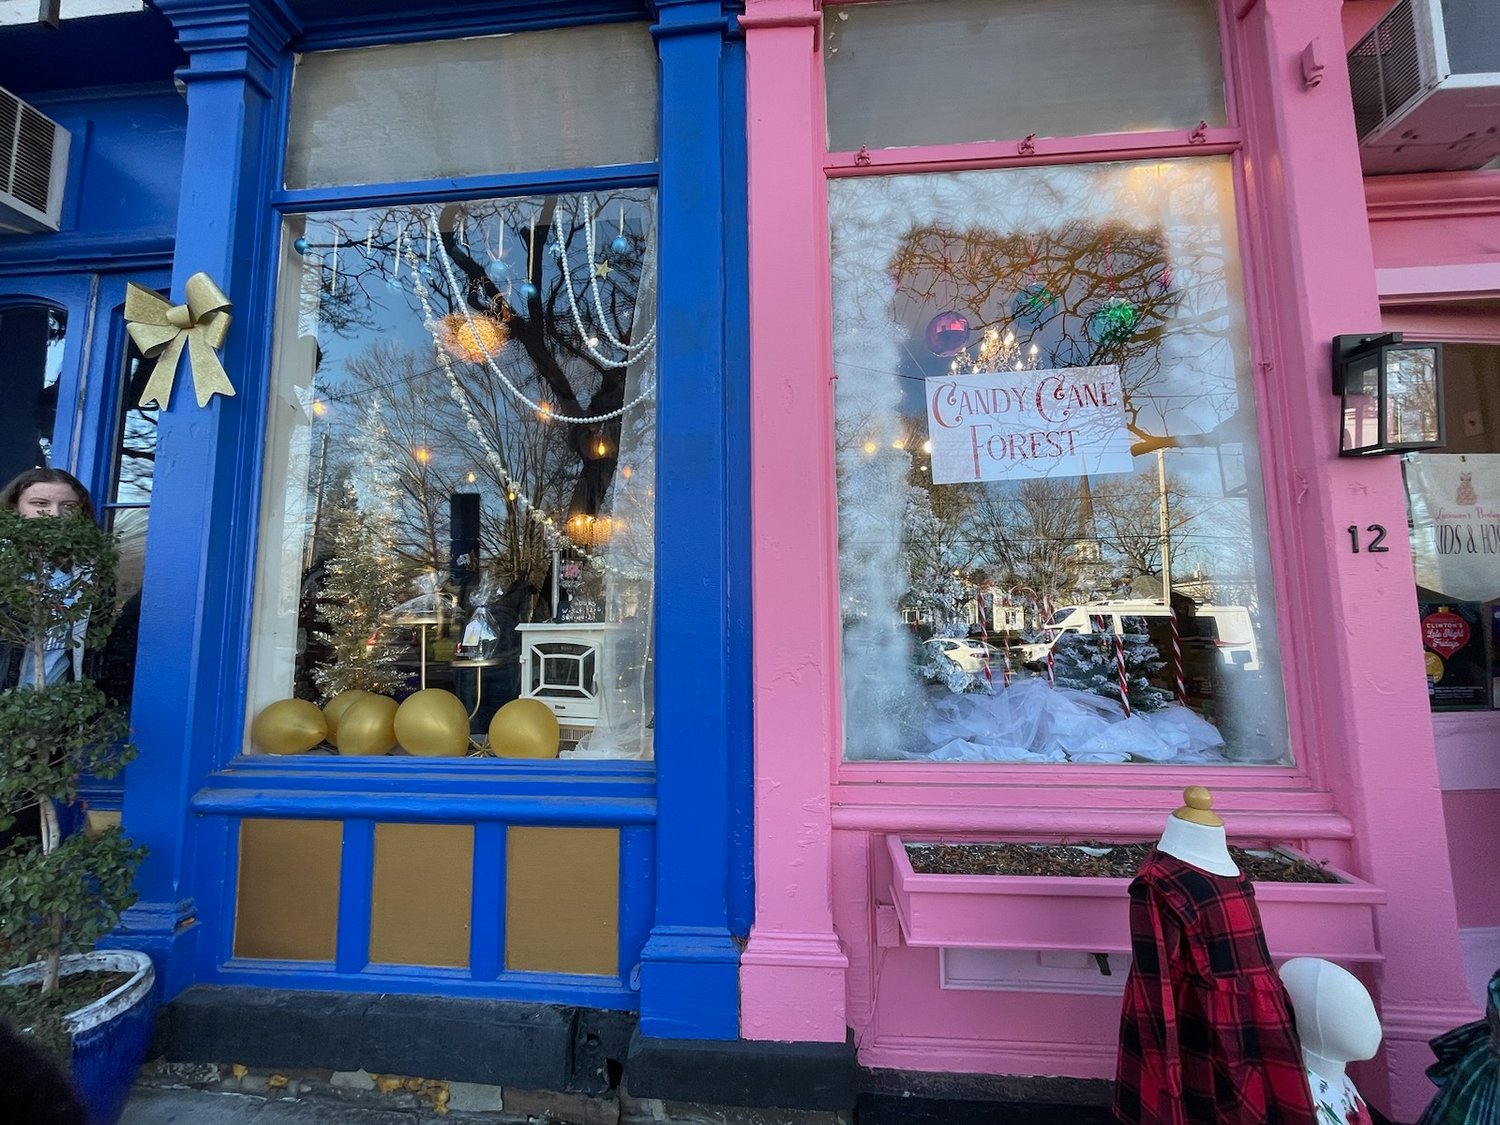 Shop windows along West Park Row in Clinton are decked out for the holidays.